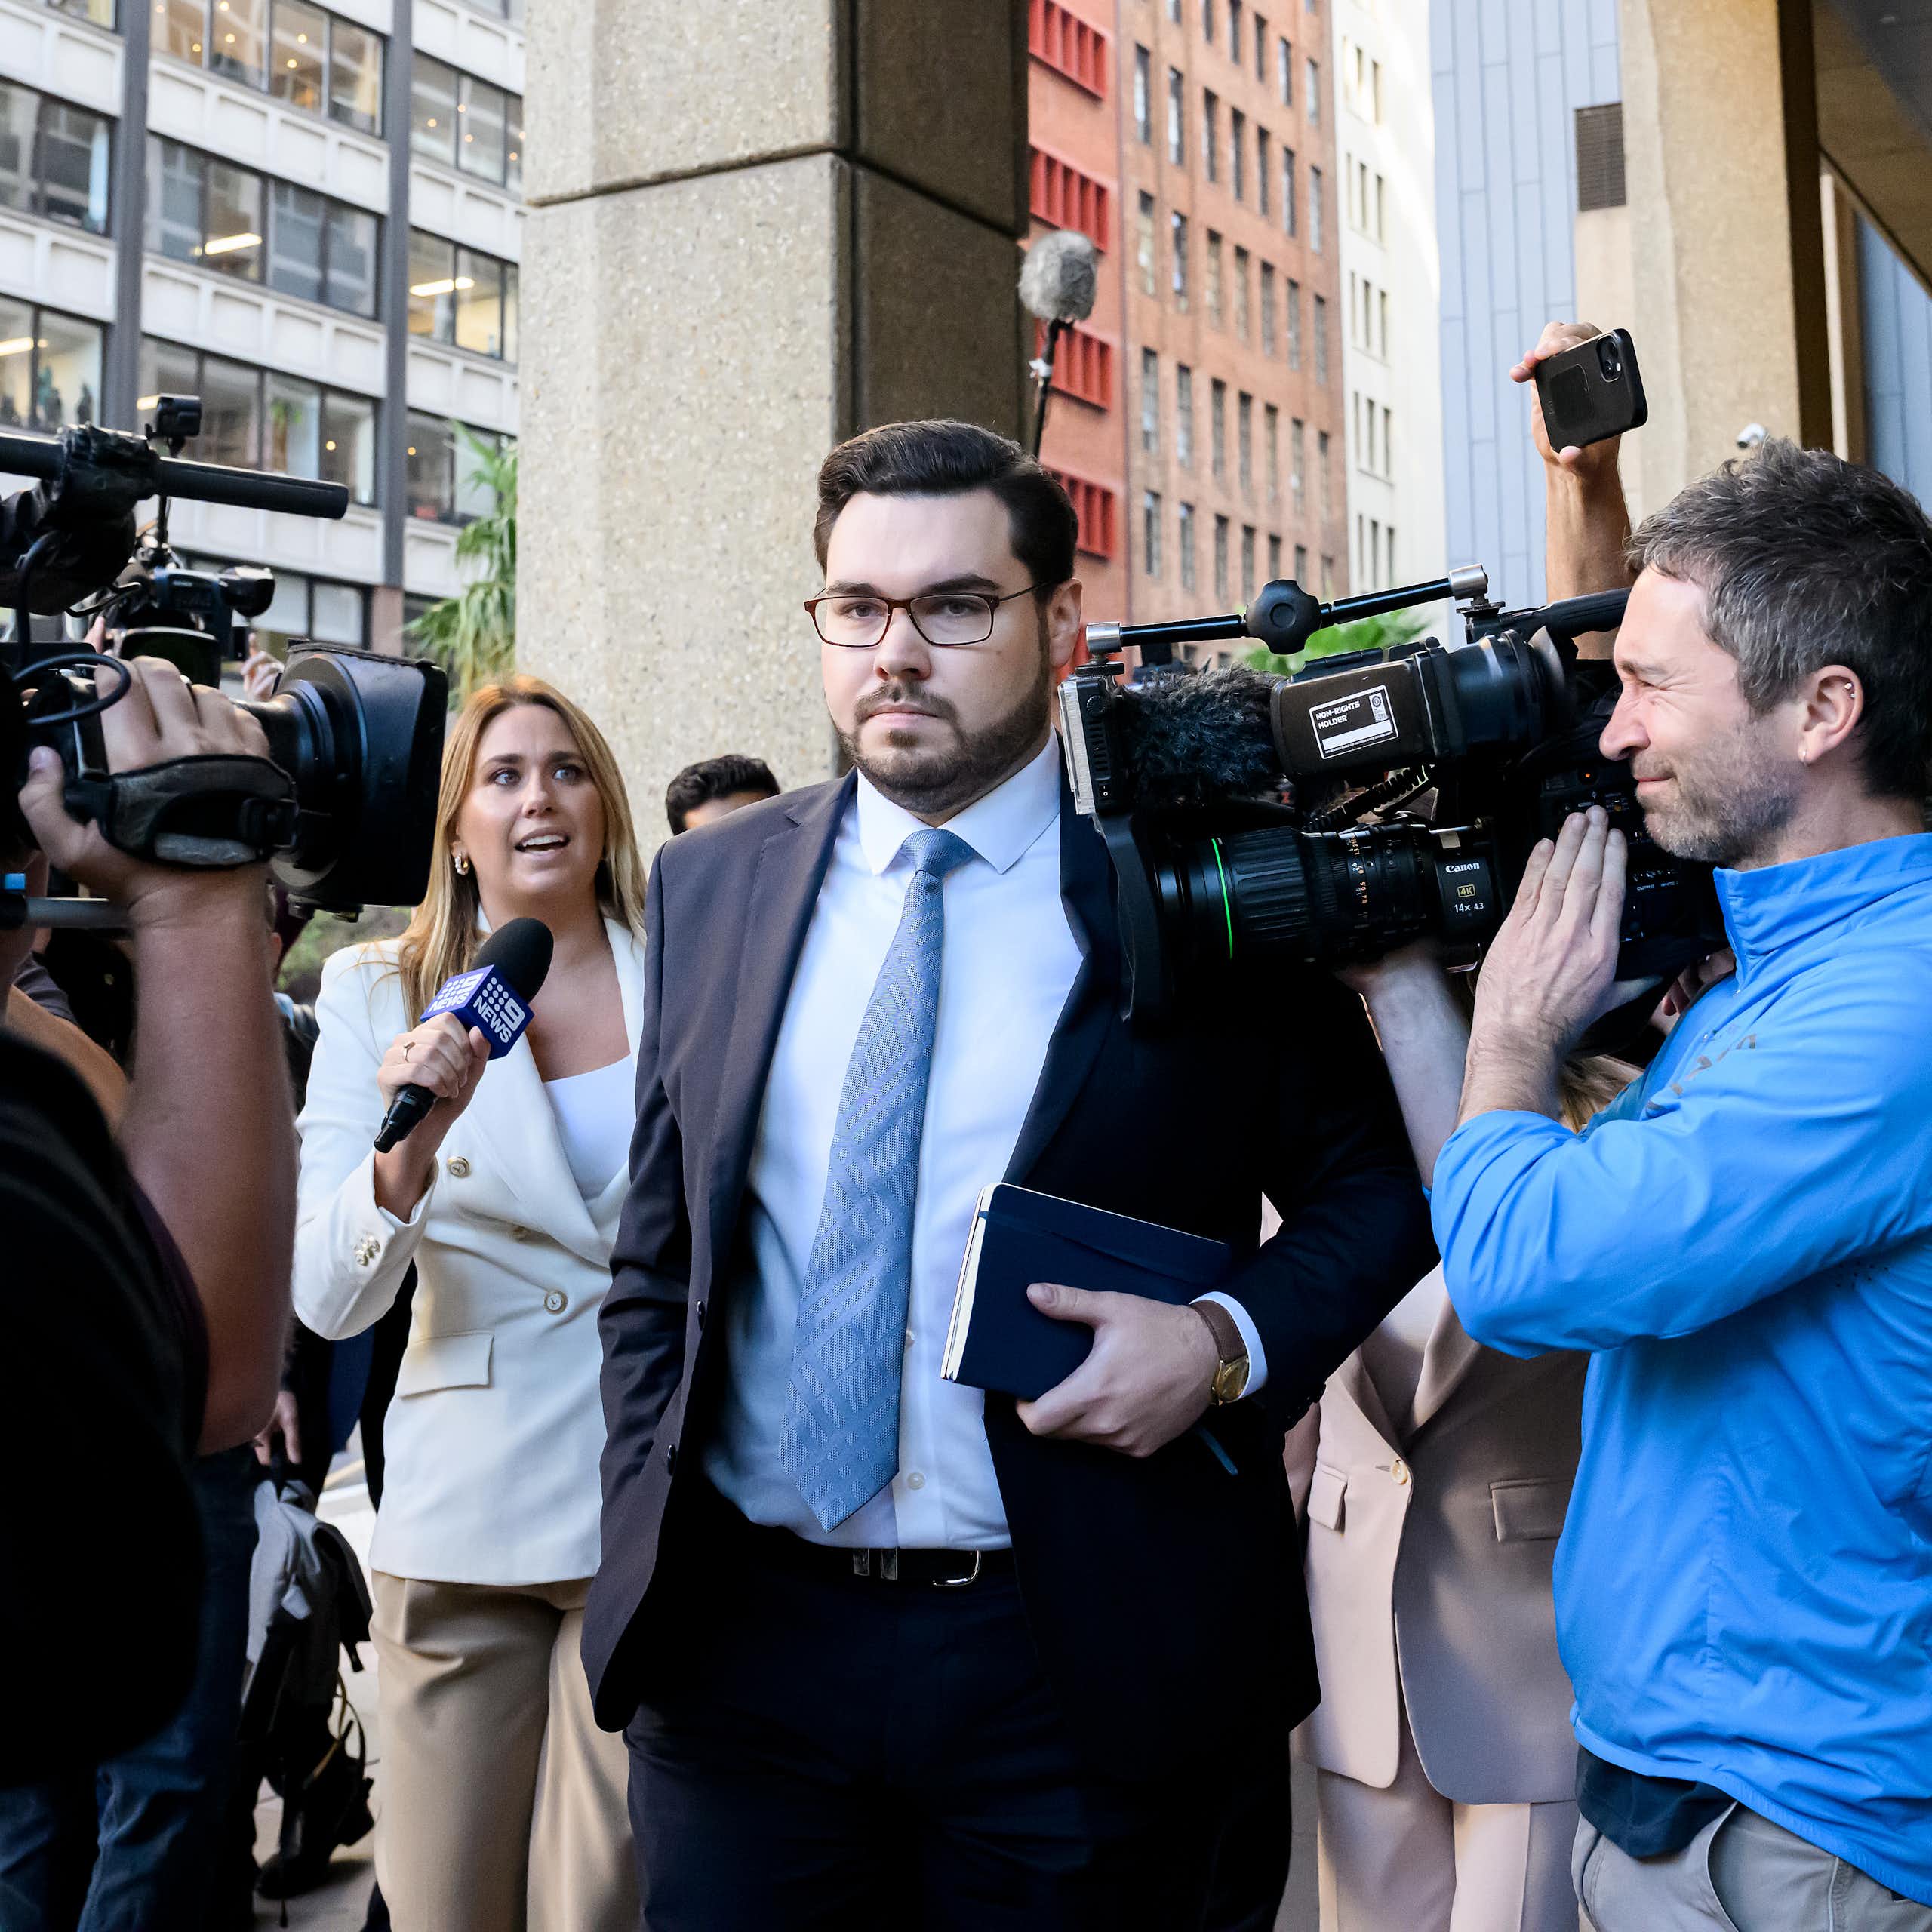 A man in glasses and a suit and tie enters a courtroom amid a crowd of cameras and journalists